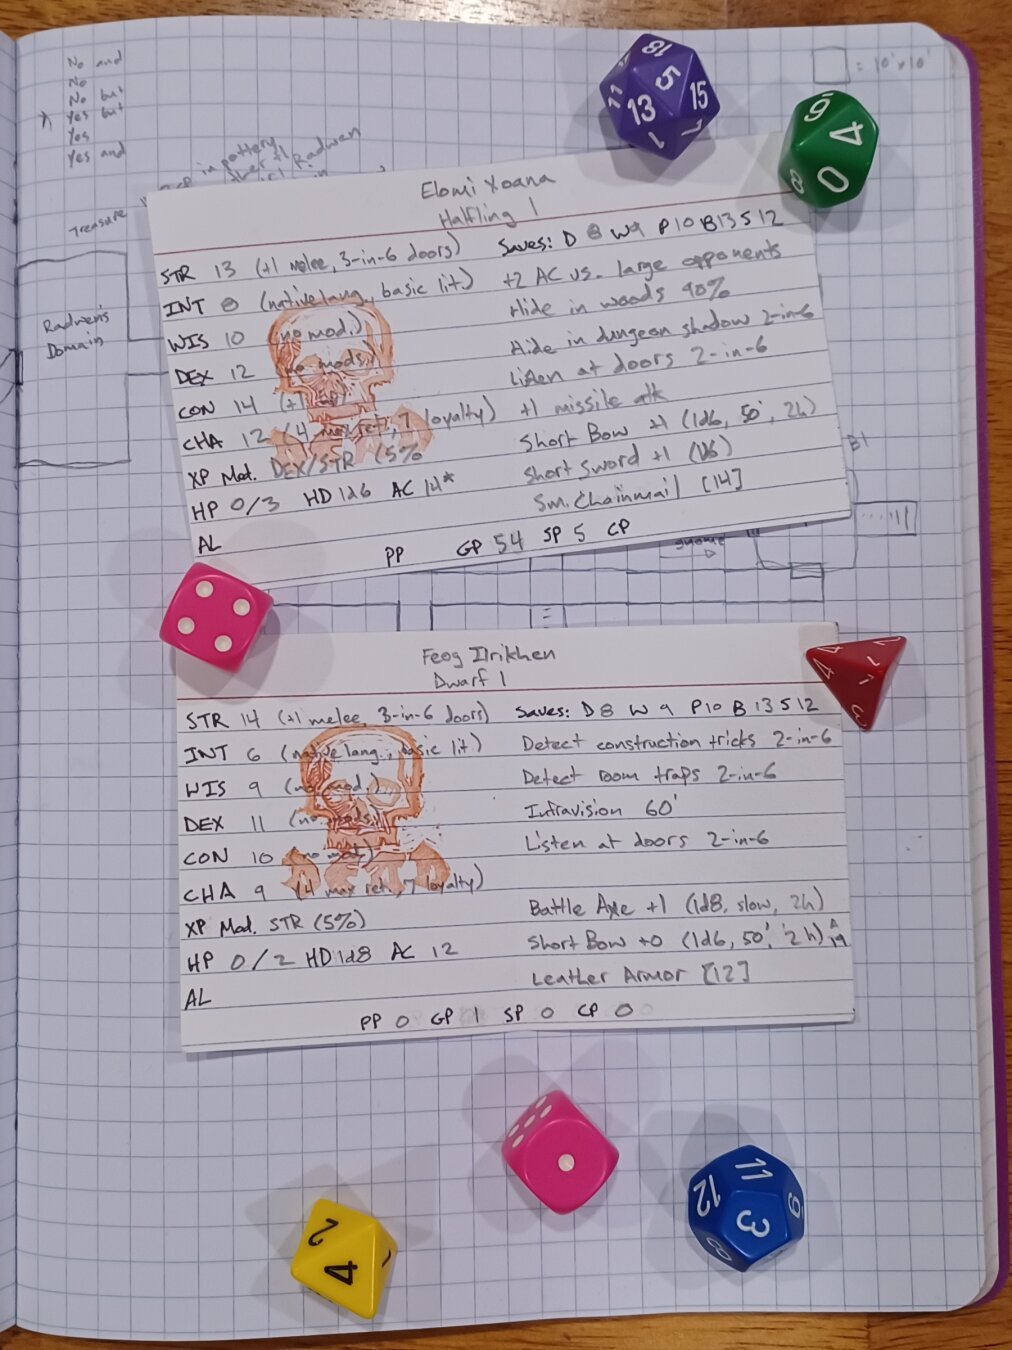 Character sheet index cards for Elomi and Feog, with a skull stamped in red on each.